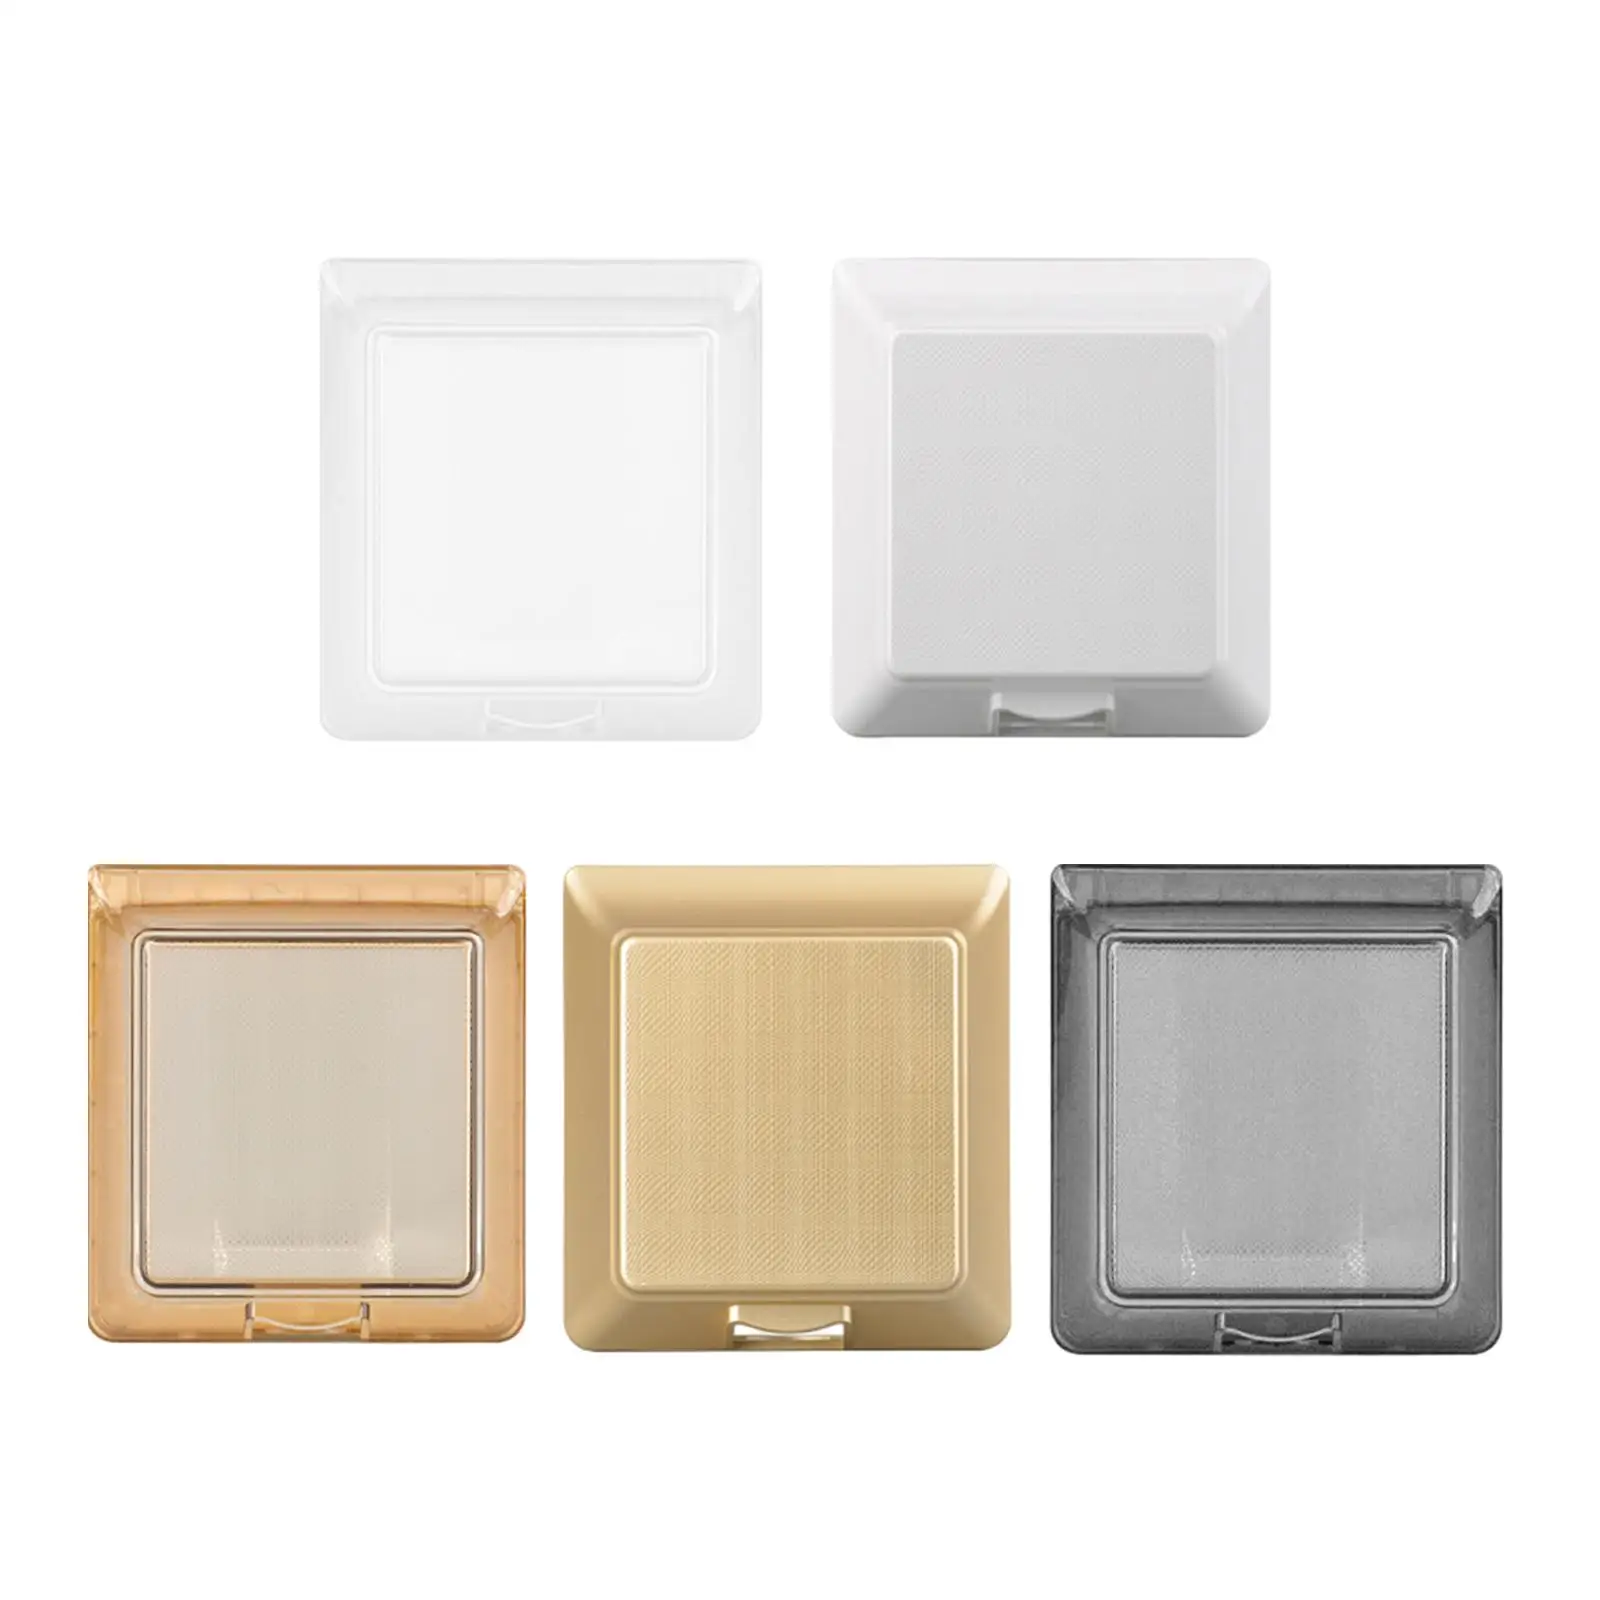 Switch Cover Waterproof Universal Switch Protection Electrical Outlet Cover Wall Switch Cover for Outdoor Workshop Living Room